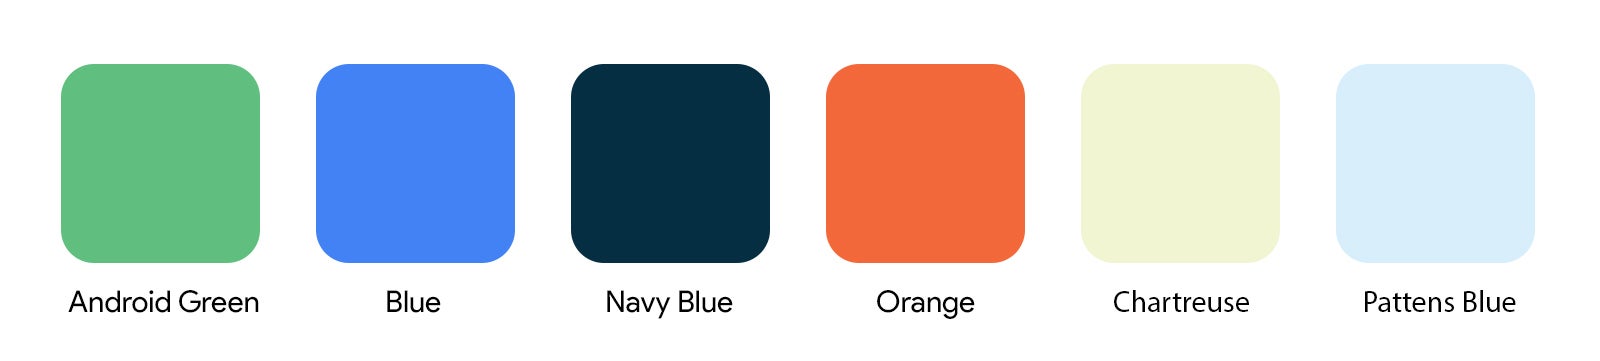 The palette that shapes Android's new brand identity - New Pixel 4 color options based on Android 10's refreshed palette envisioned in concept renders